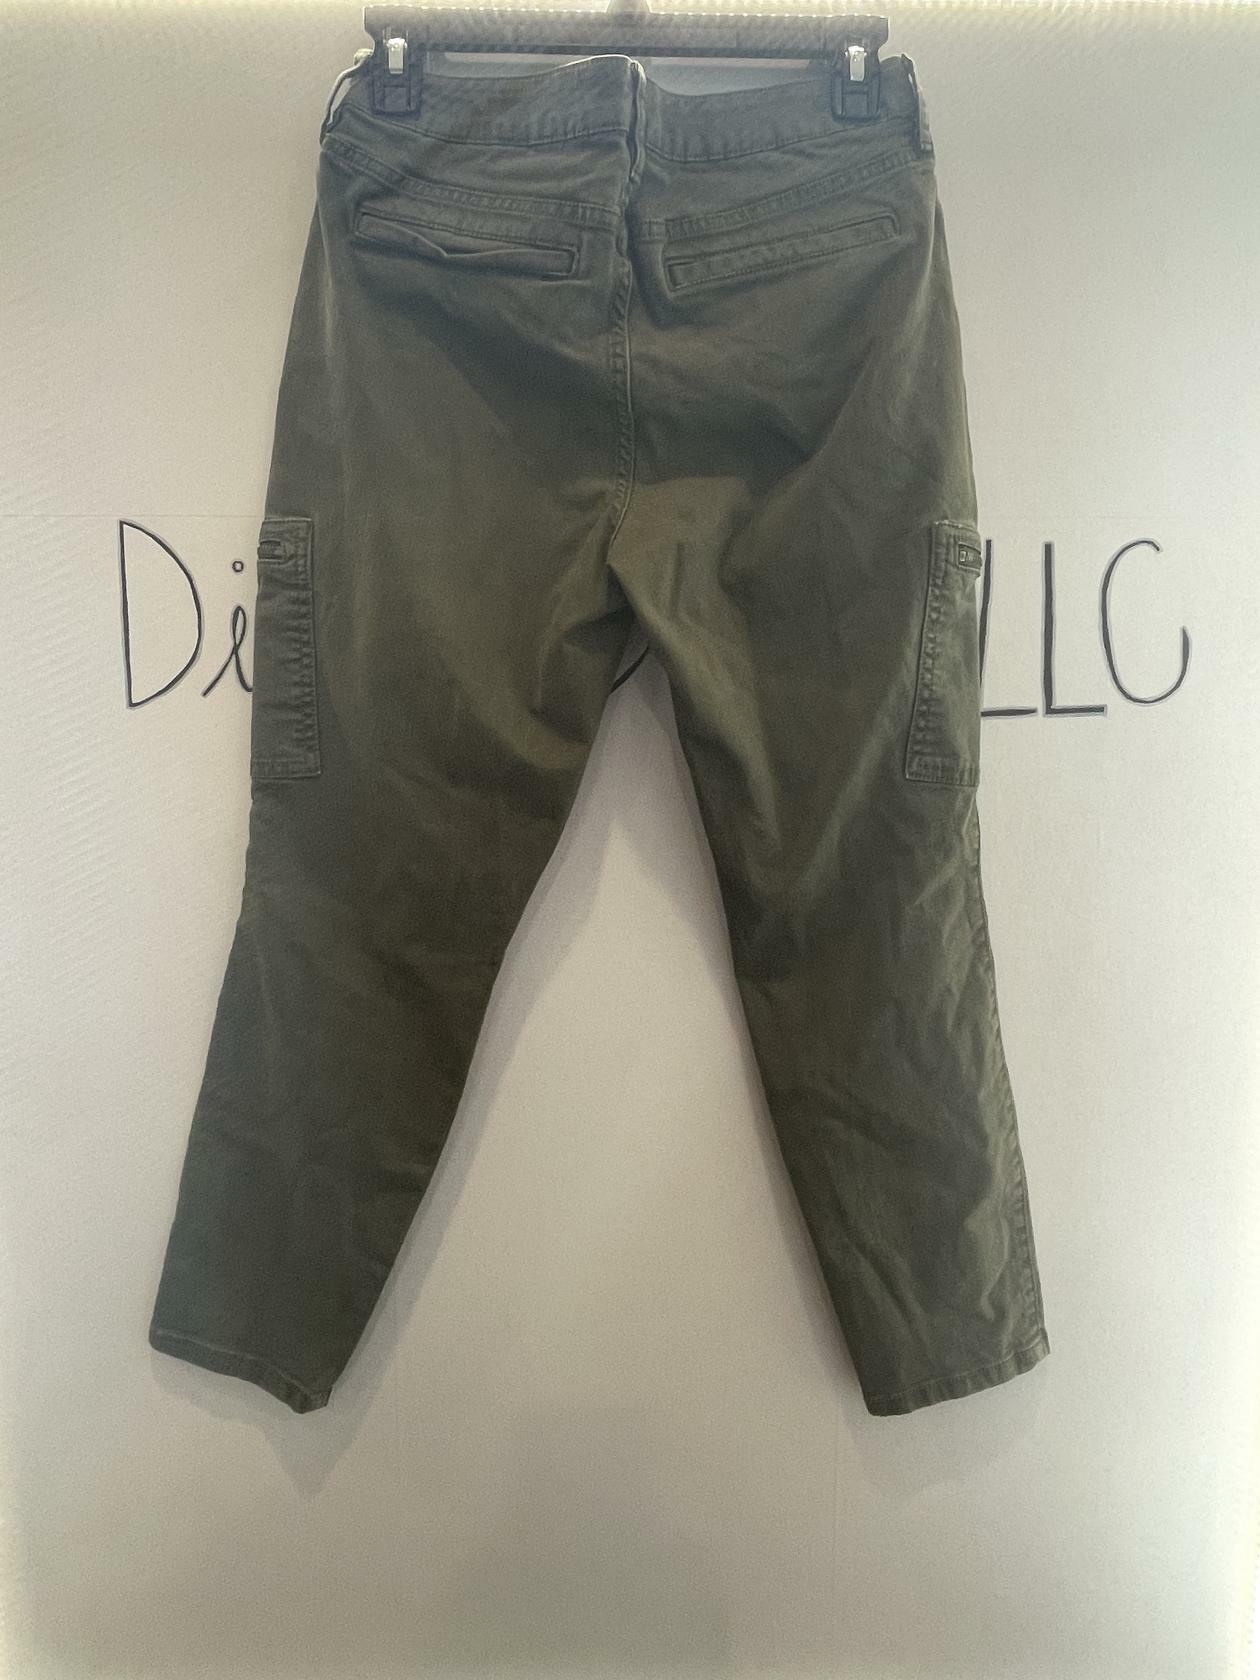 Ana A New Approach Petite 29/8P Skinny Ankle Army Green Pants - Very Good